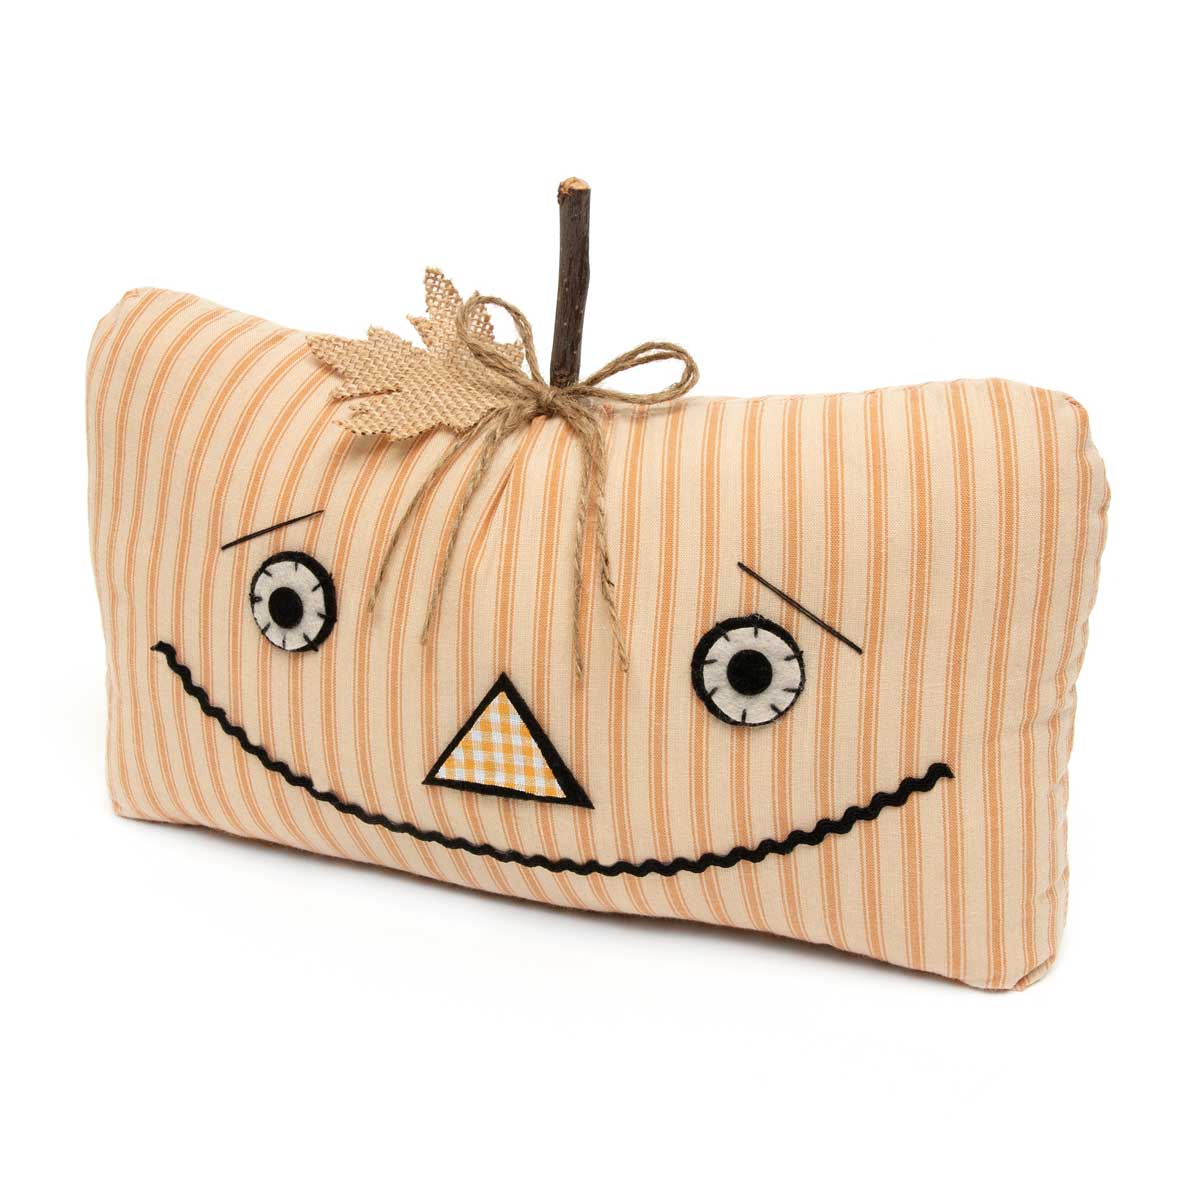 PILLOW PUMPKIN FACE LARGE 12.5IN X 4.25IN X 6.5IN ORANGE/BEIGE - Click Image to Close